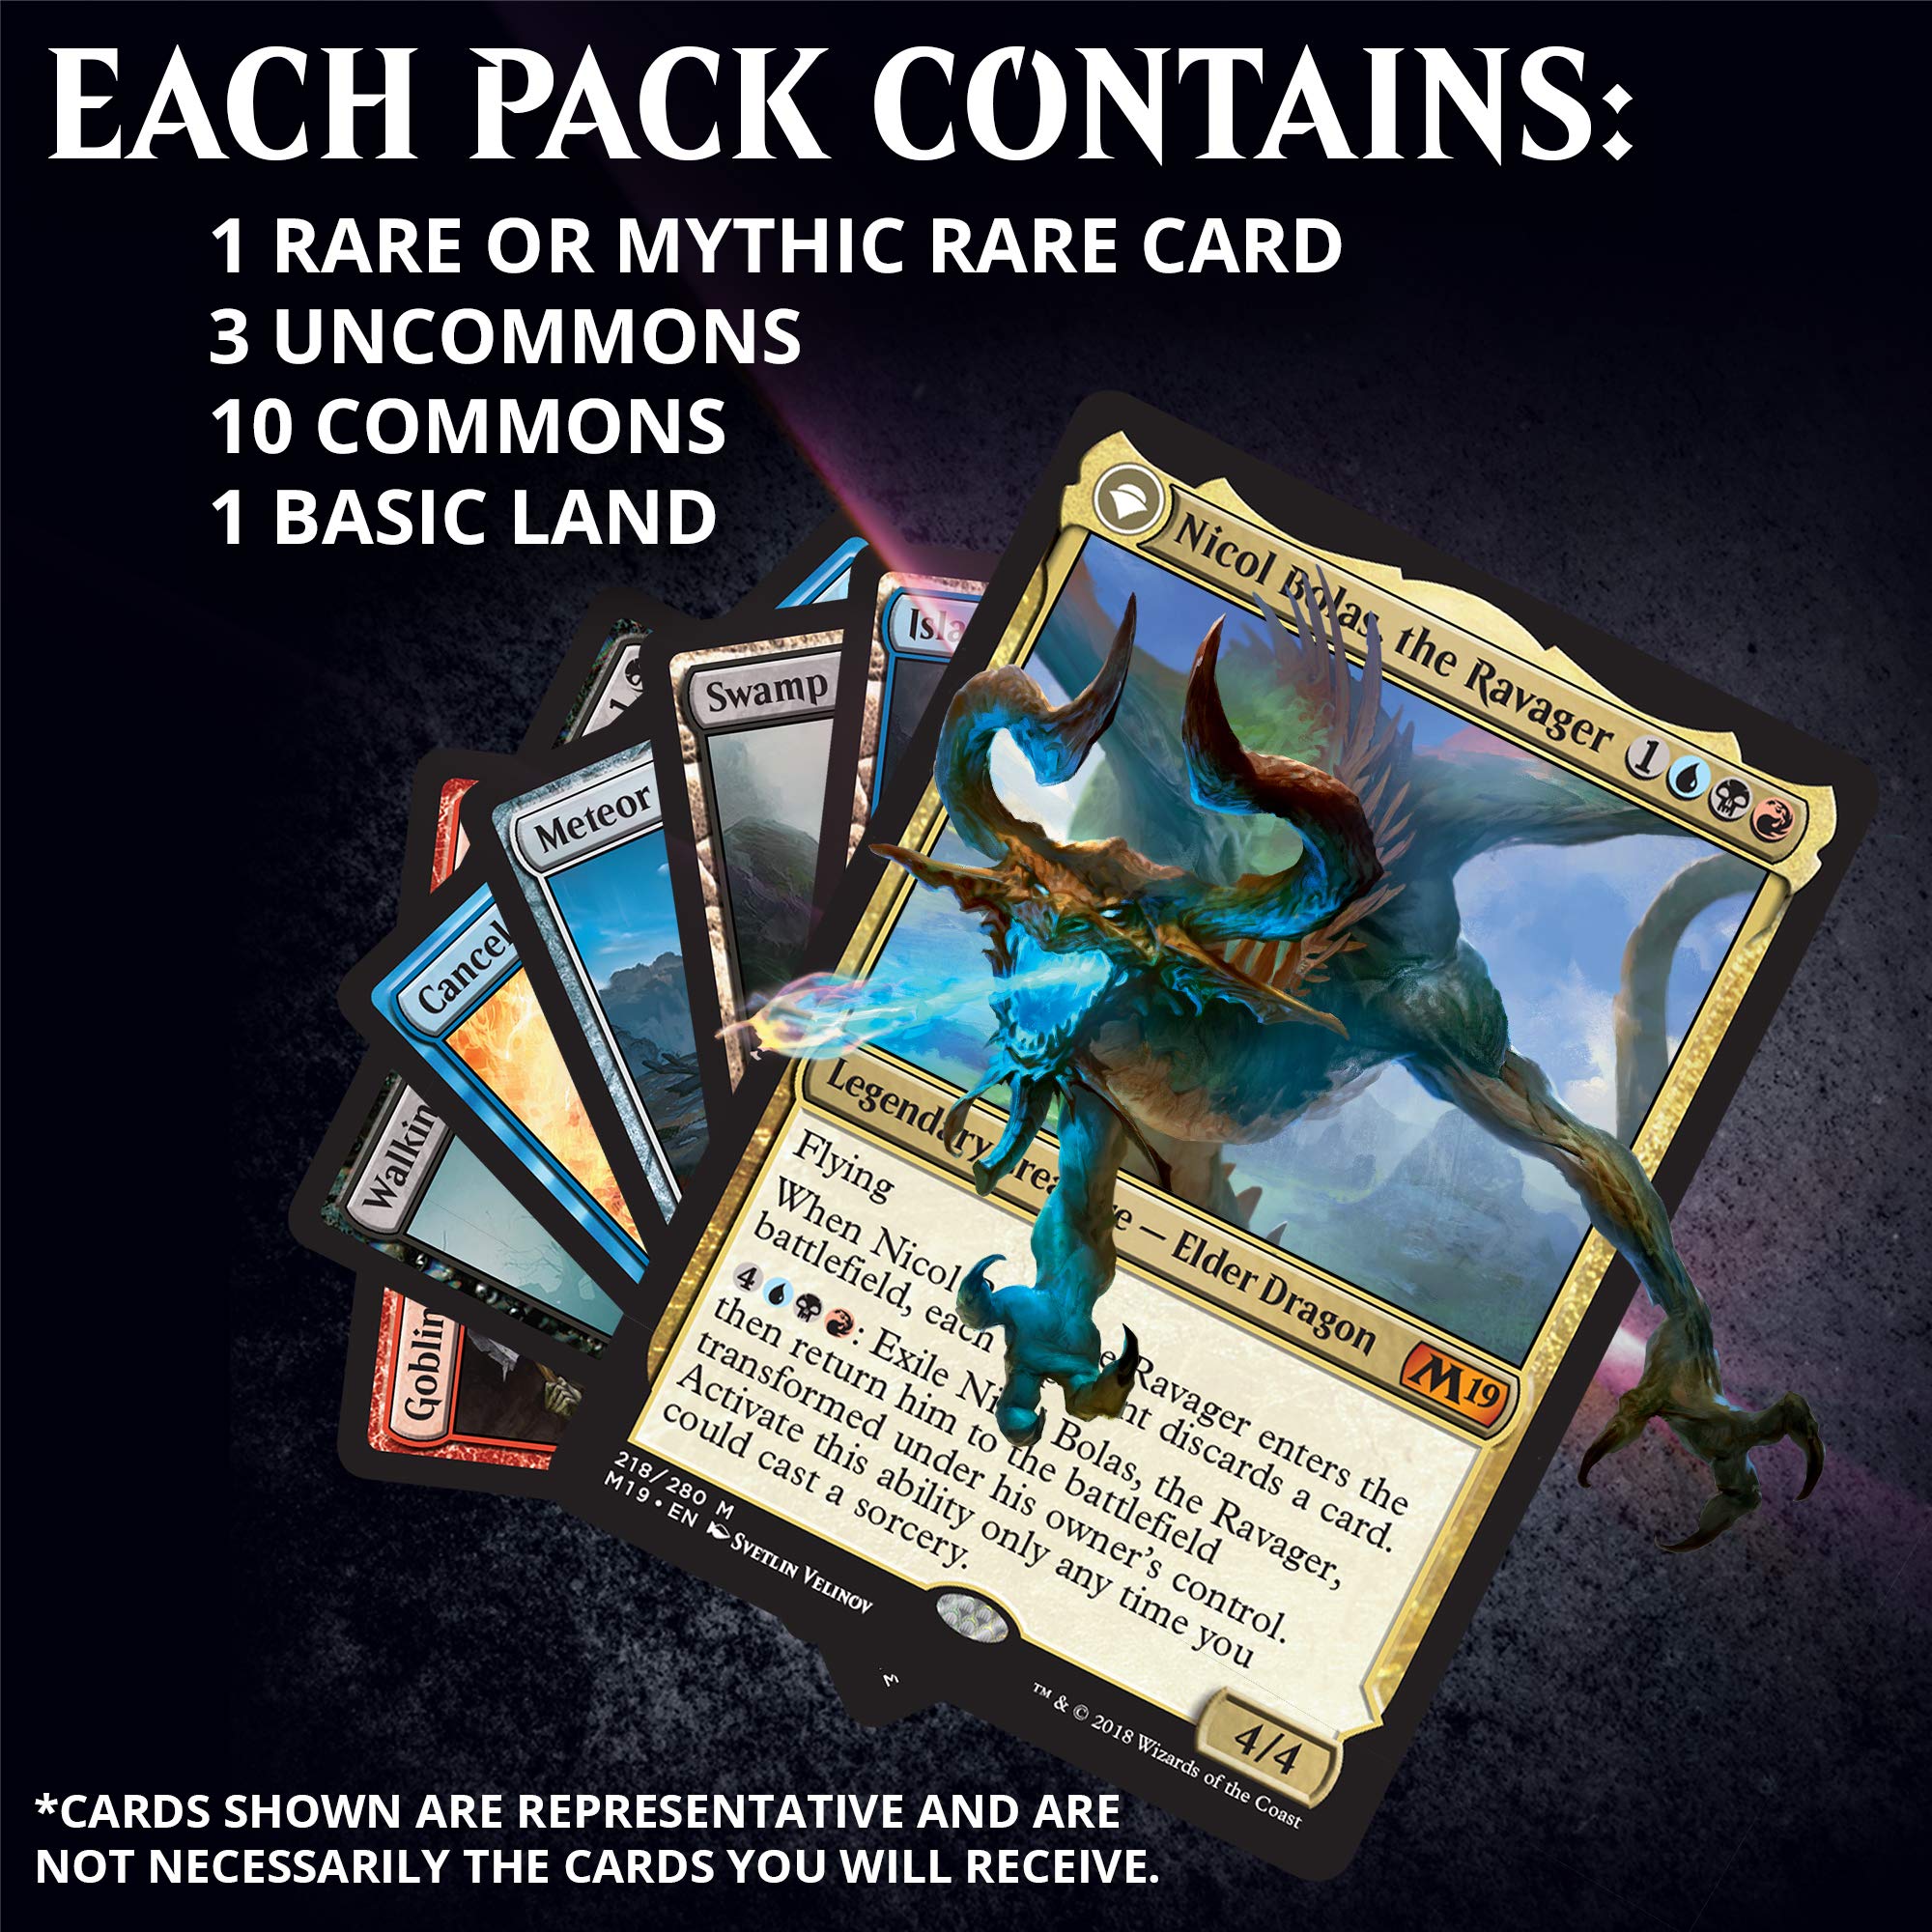 Magic: The Gathering Core Set 2019 Bundle | 10 Booster Packs | Accessories